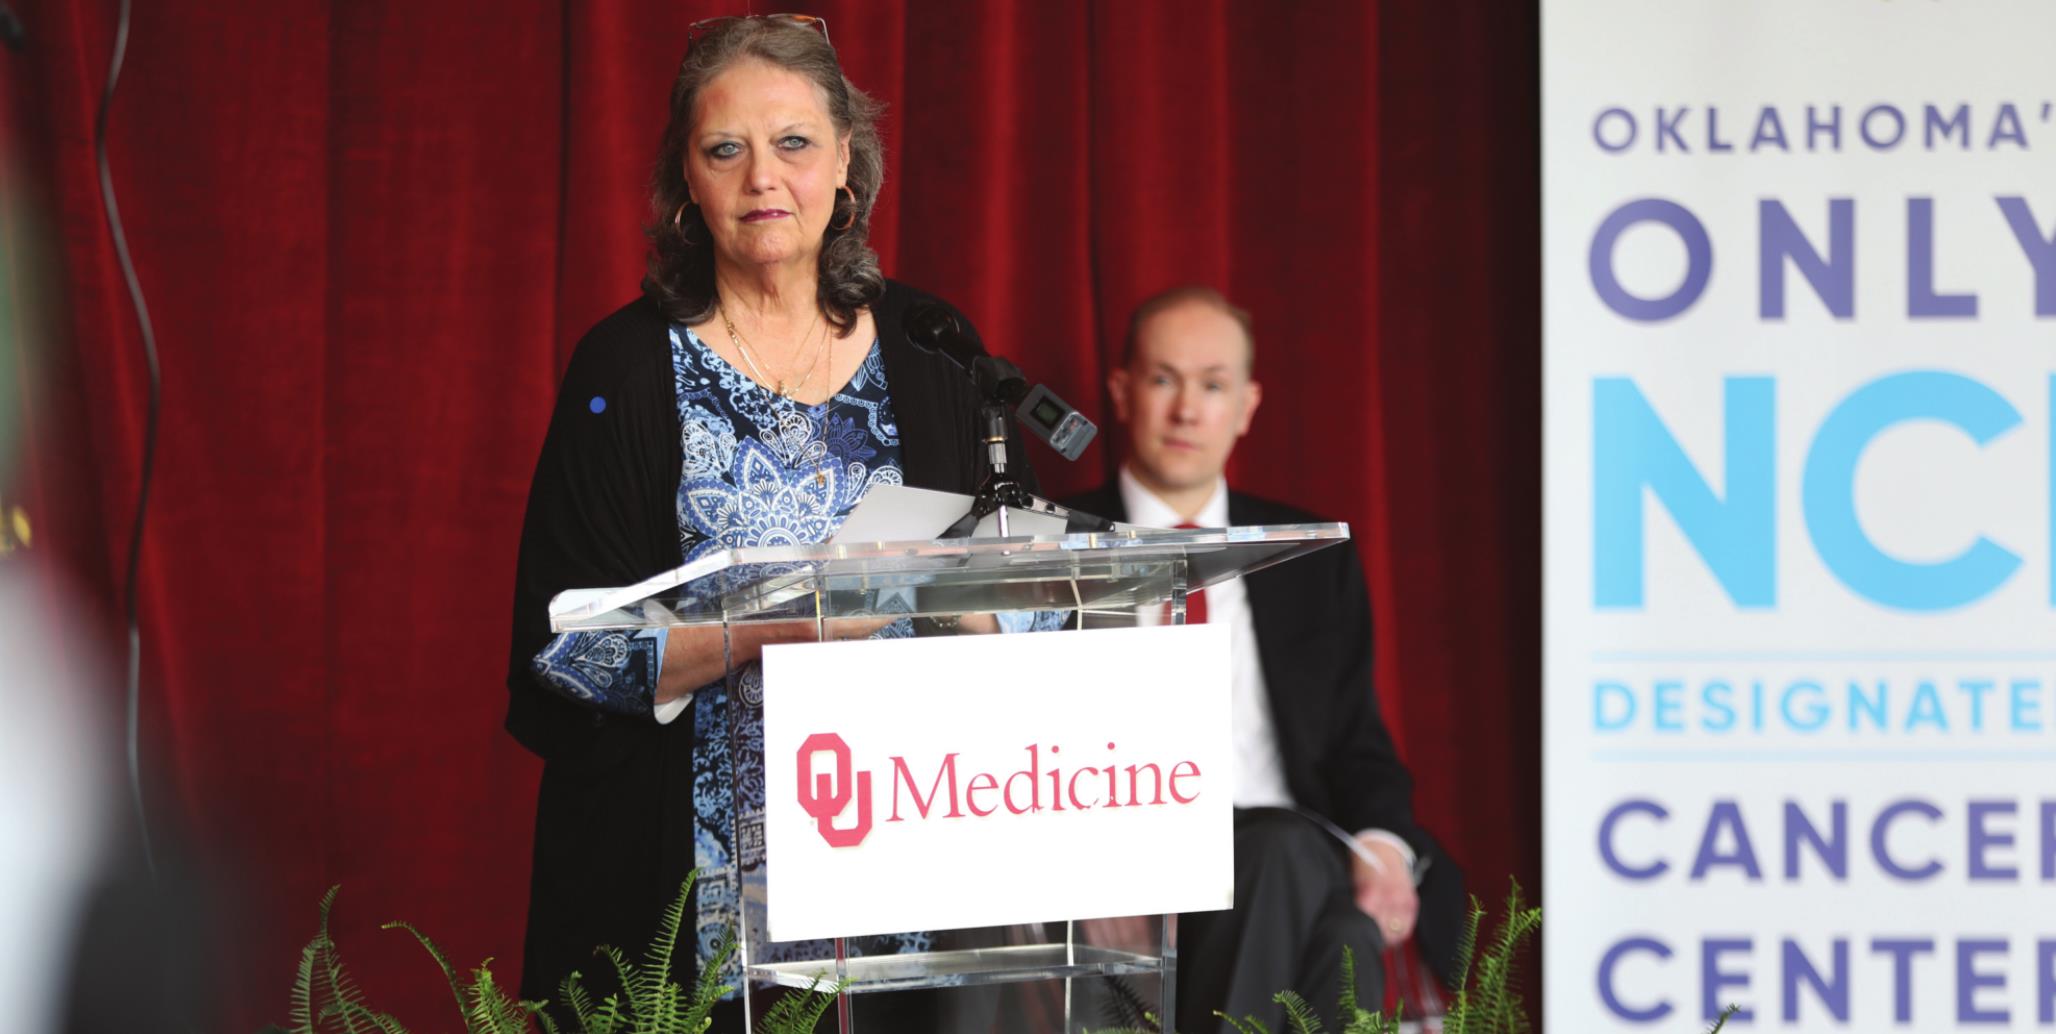 Provided Deborrah Winters has her cancer in control thanks to a clinical trial and the staff at Stephenson Cancer Center, part of the OU Medicine family.